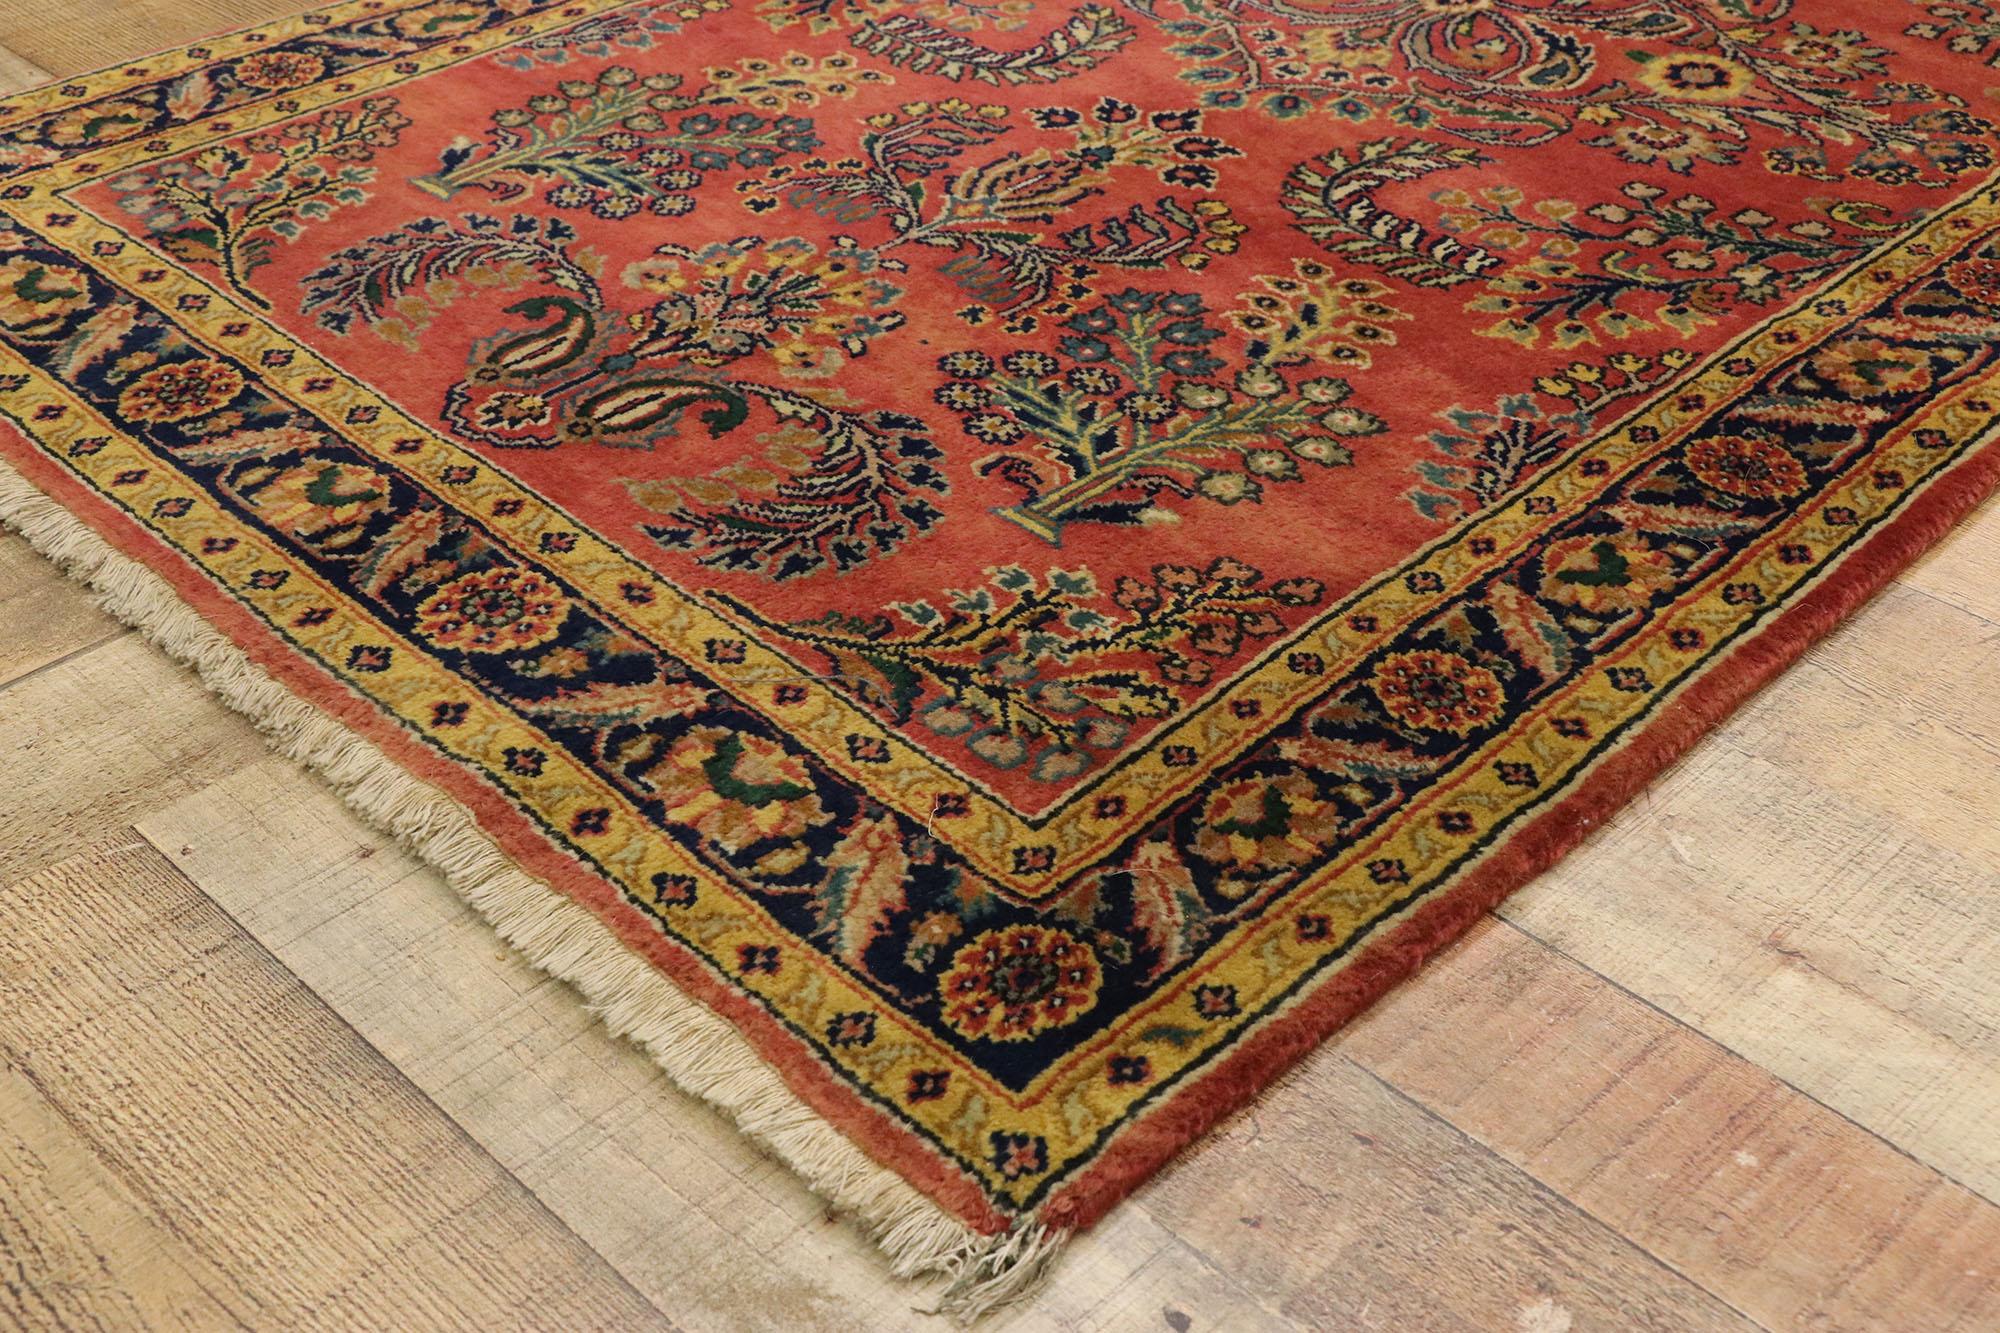 Vintage Persian Floral Sarouk Rug with Traditional English Tudor Style In Good Condition For Sale In Dallas, TX